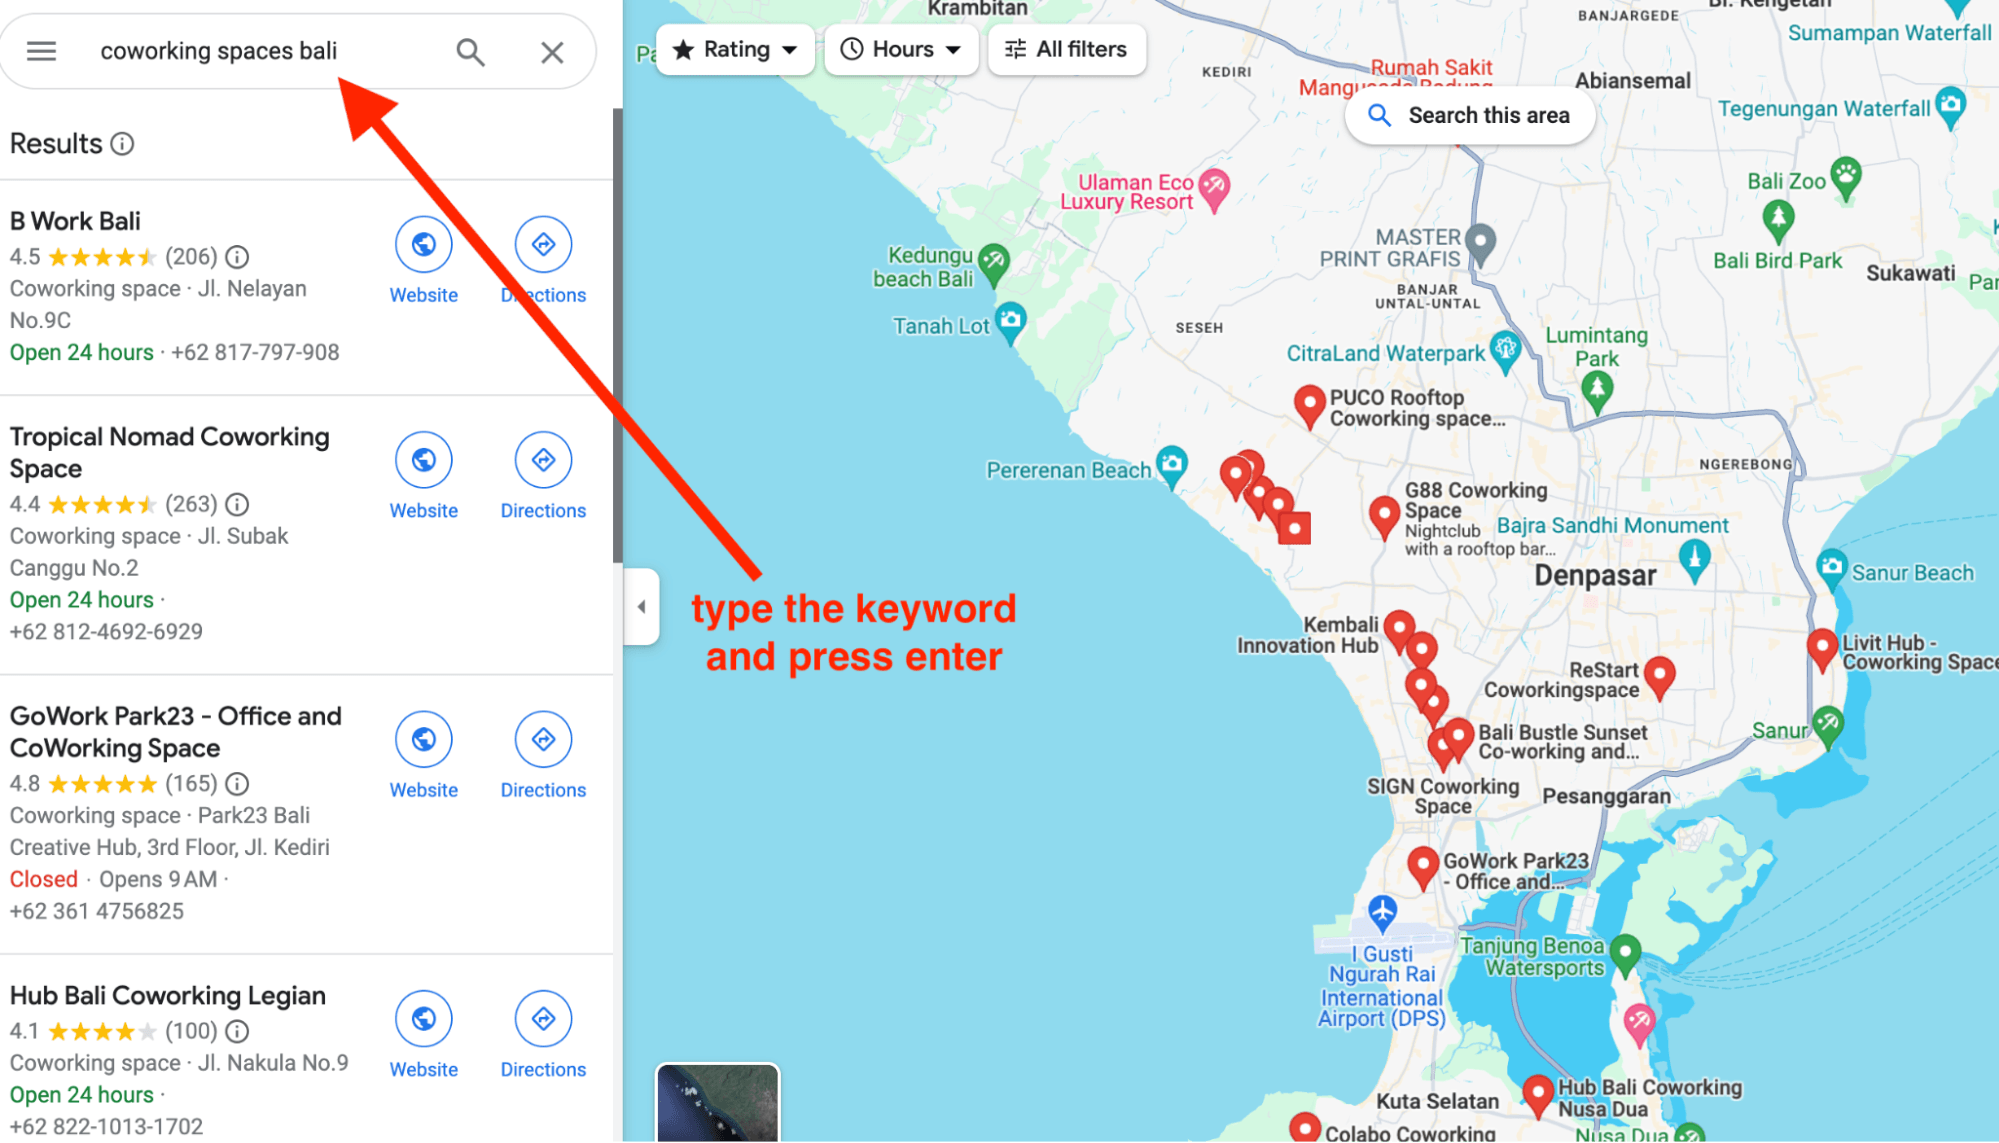 type query google maps to search coworking spaces in bali - image34.png